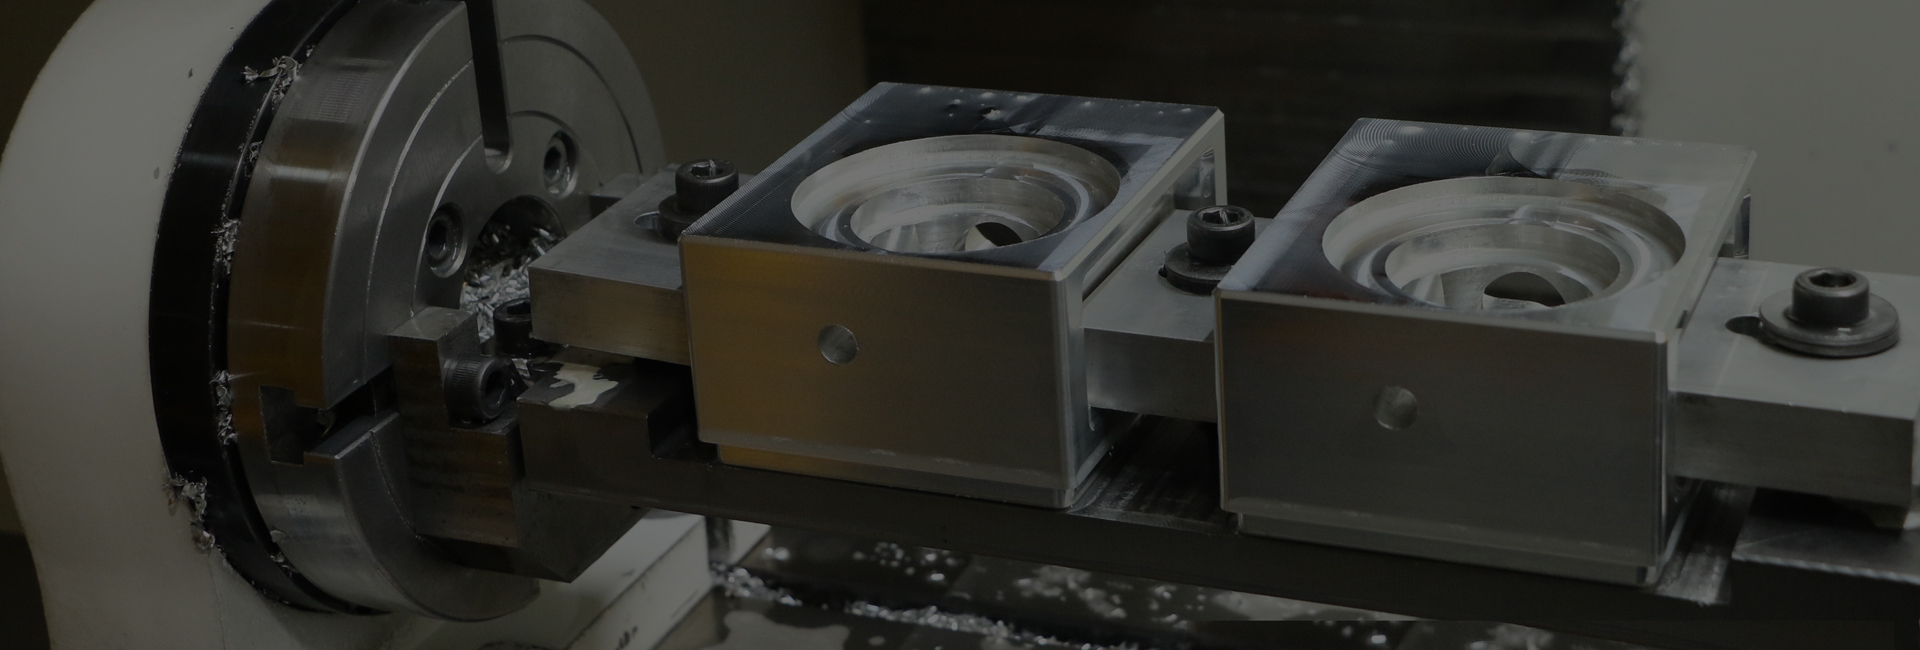 OEM CNC MACHINING SERVICES FROM RICHCONN